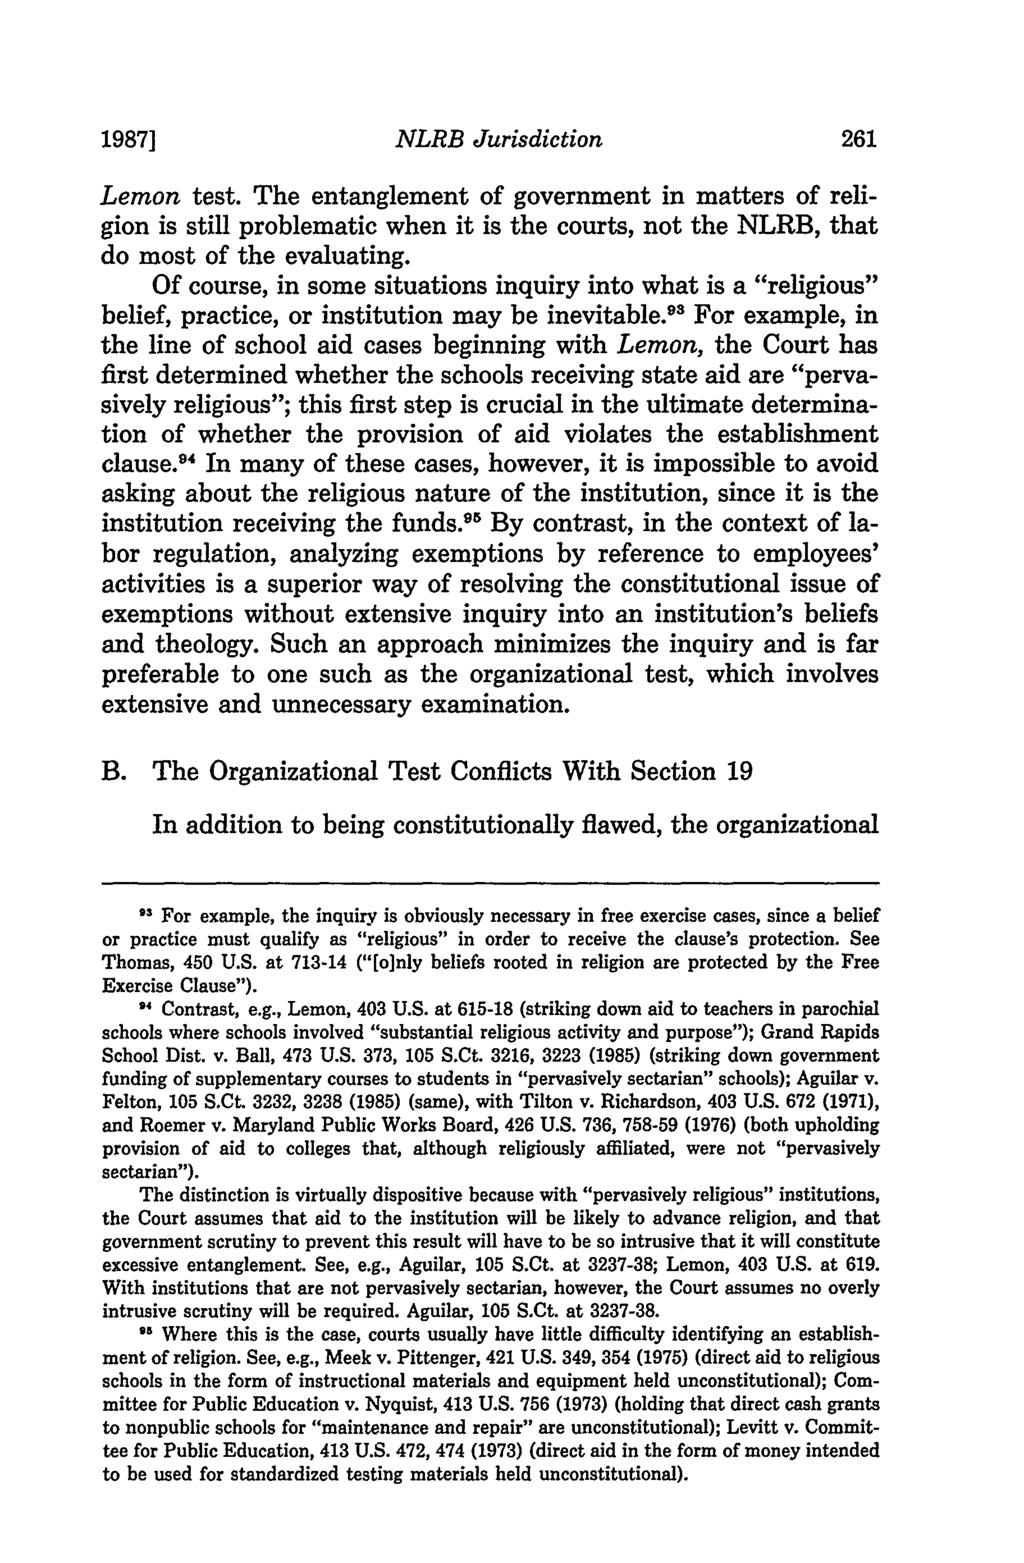 1987] NLRB Jurisdiction Lemon test. The entanglement of government in matters of religion is still problematic when it is the courts, not the NLRB, that do most of the evaluating.